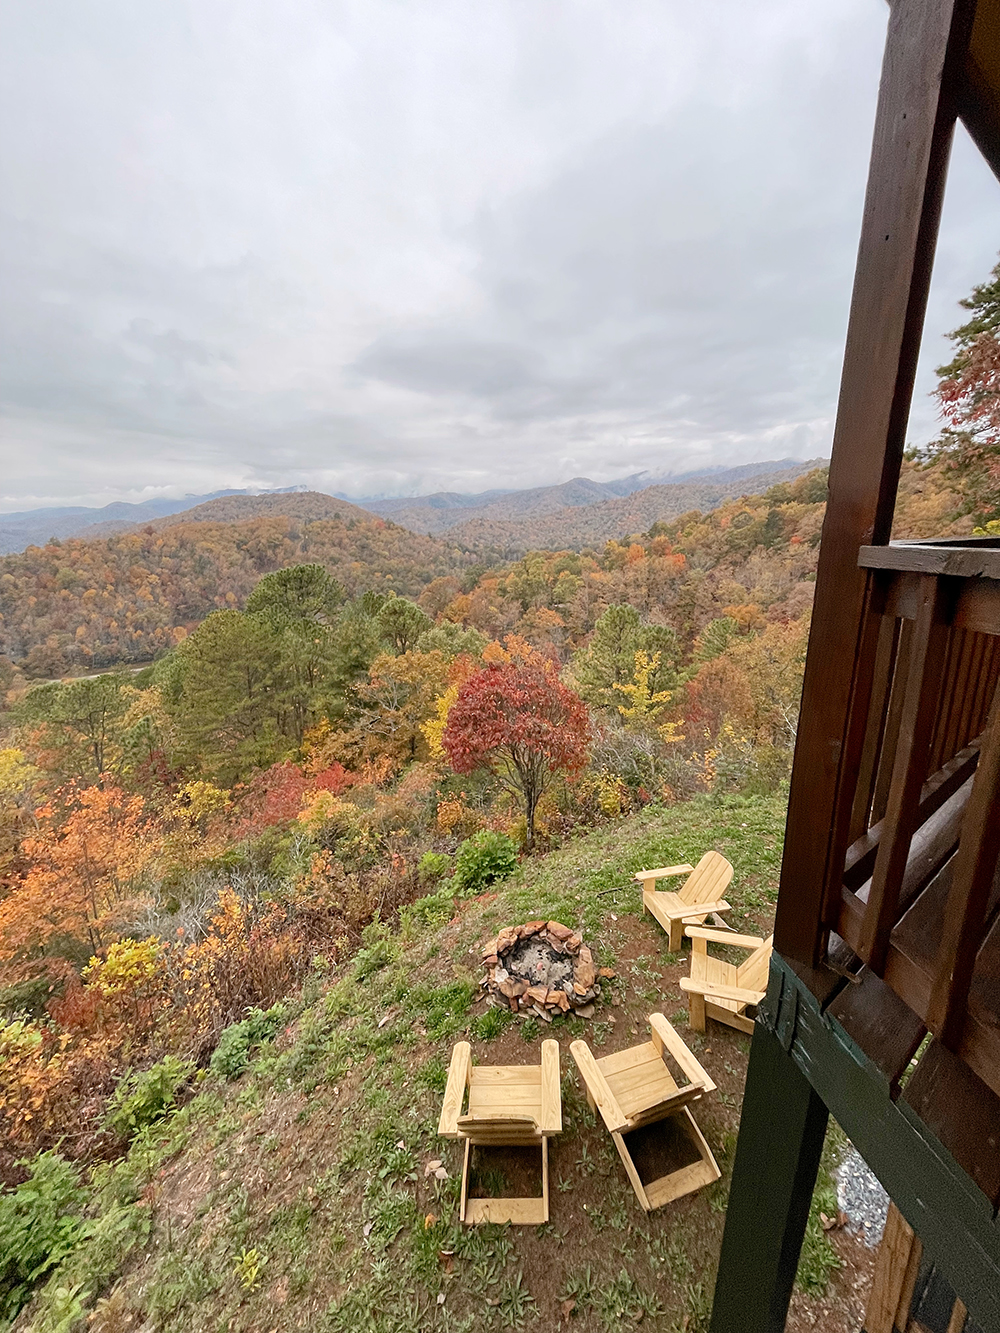 The Blues Mountainview Lodge, a blue Ridge Mountains cabin with Extreme Views